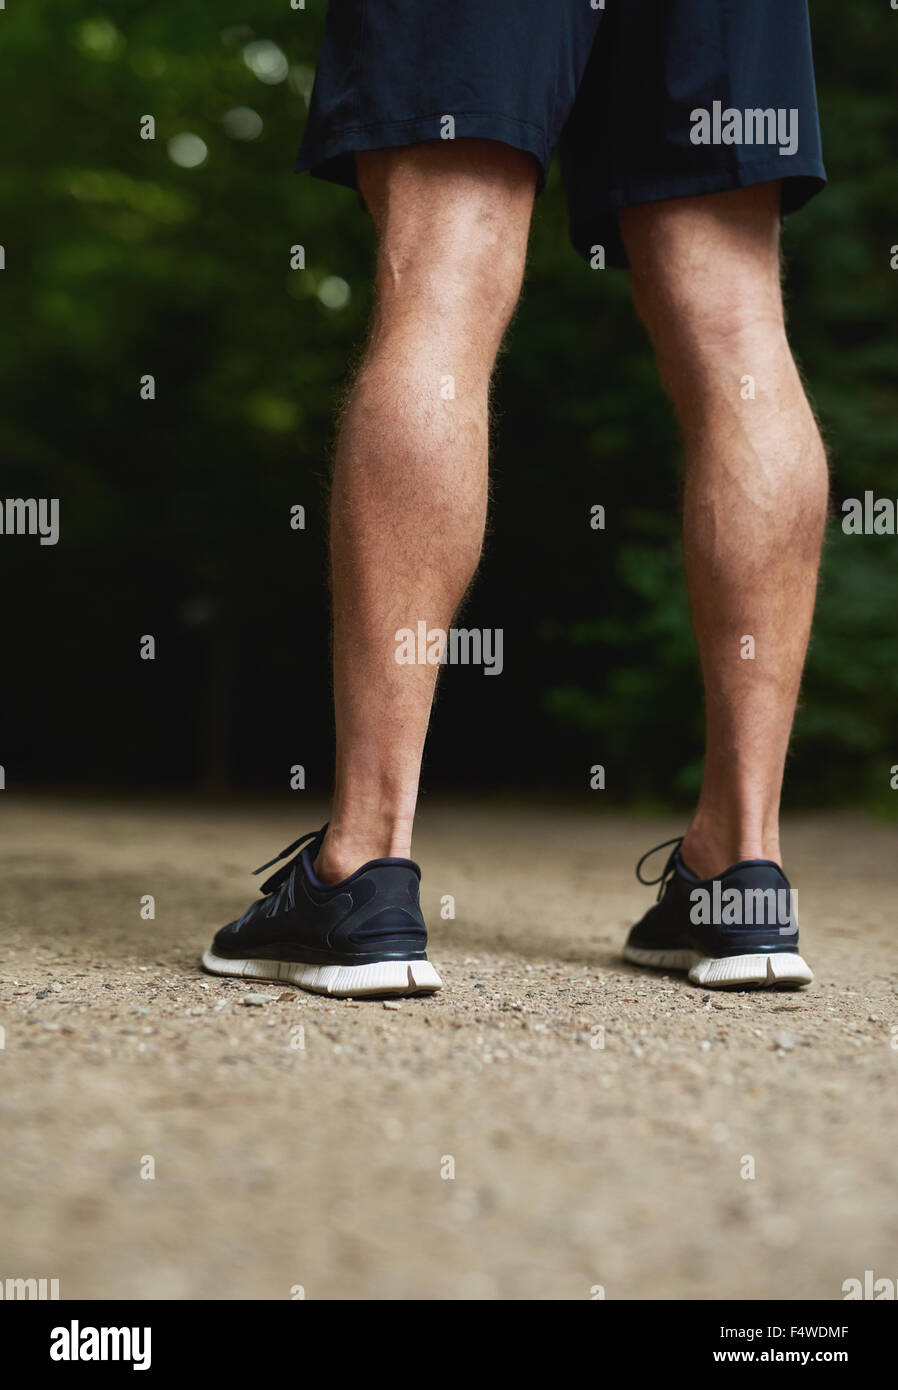 Rear view of the legs of a fit muscular athletic man with toned calves standing outdoors in his sportswear Stock Photo